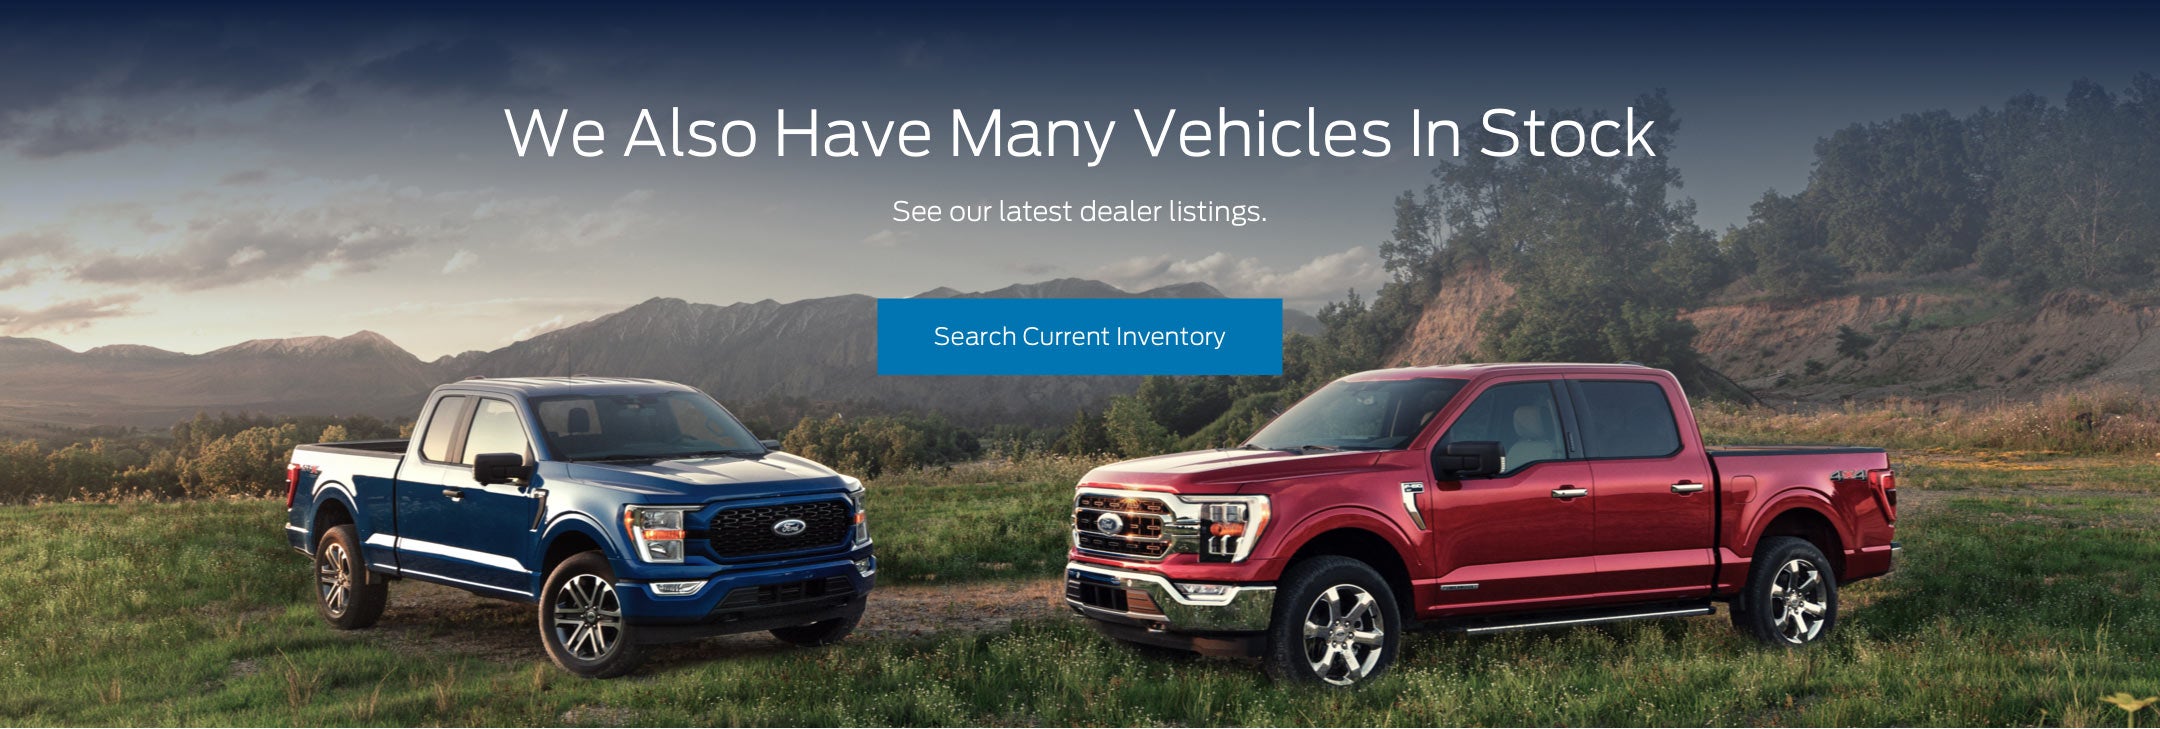 Ford vehicles in stock | Seekins Ford Lincoln in Fairbanks AK